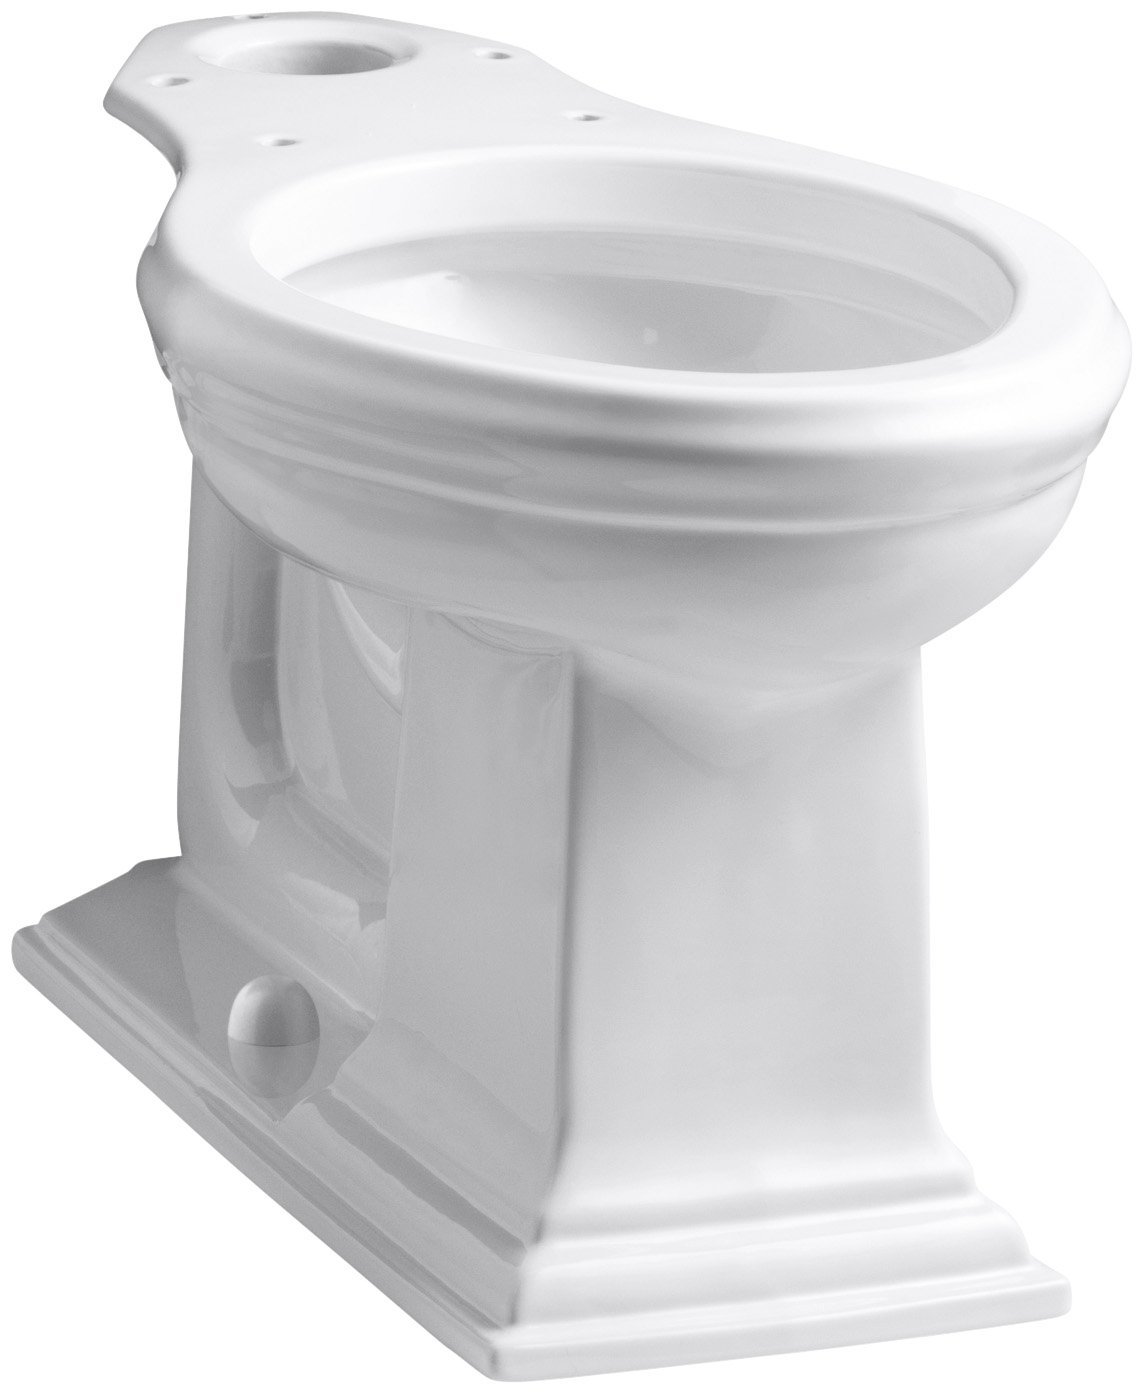 Kohler Memoirs Toilet Review - Style and Comfort in One ...